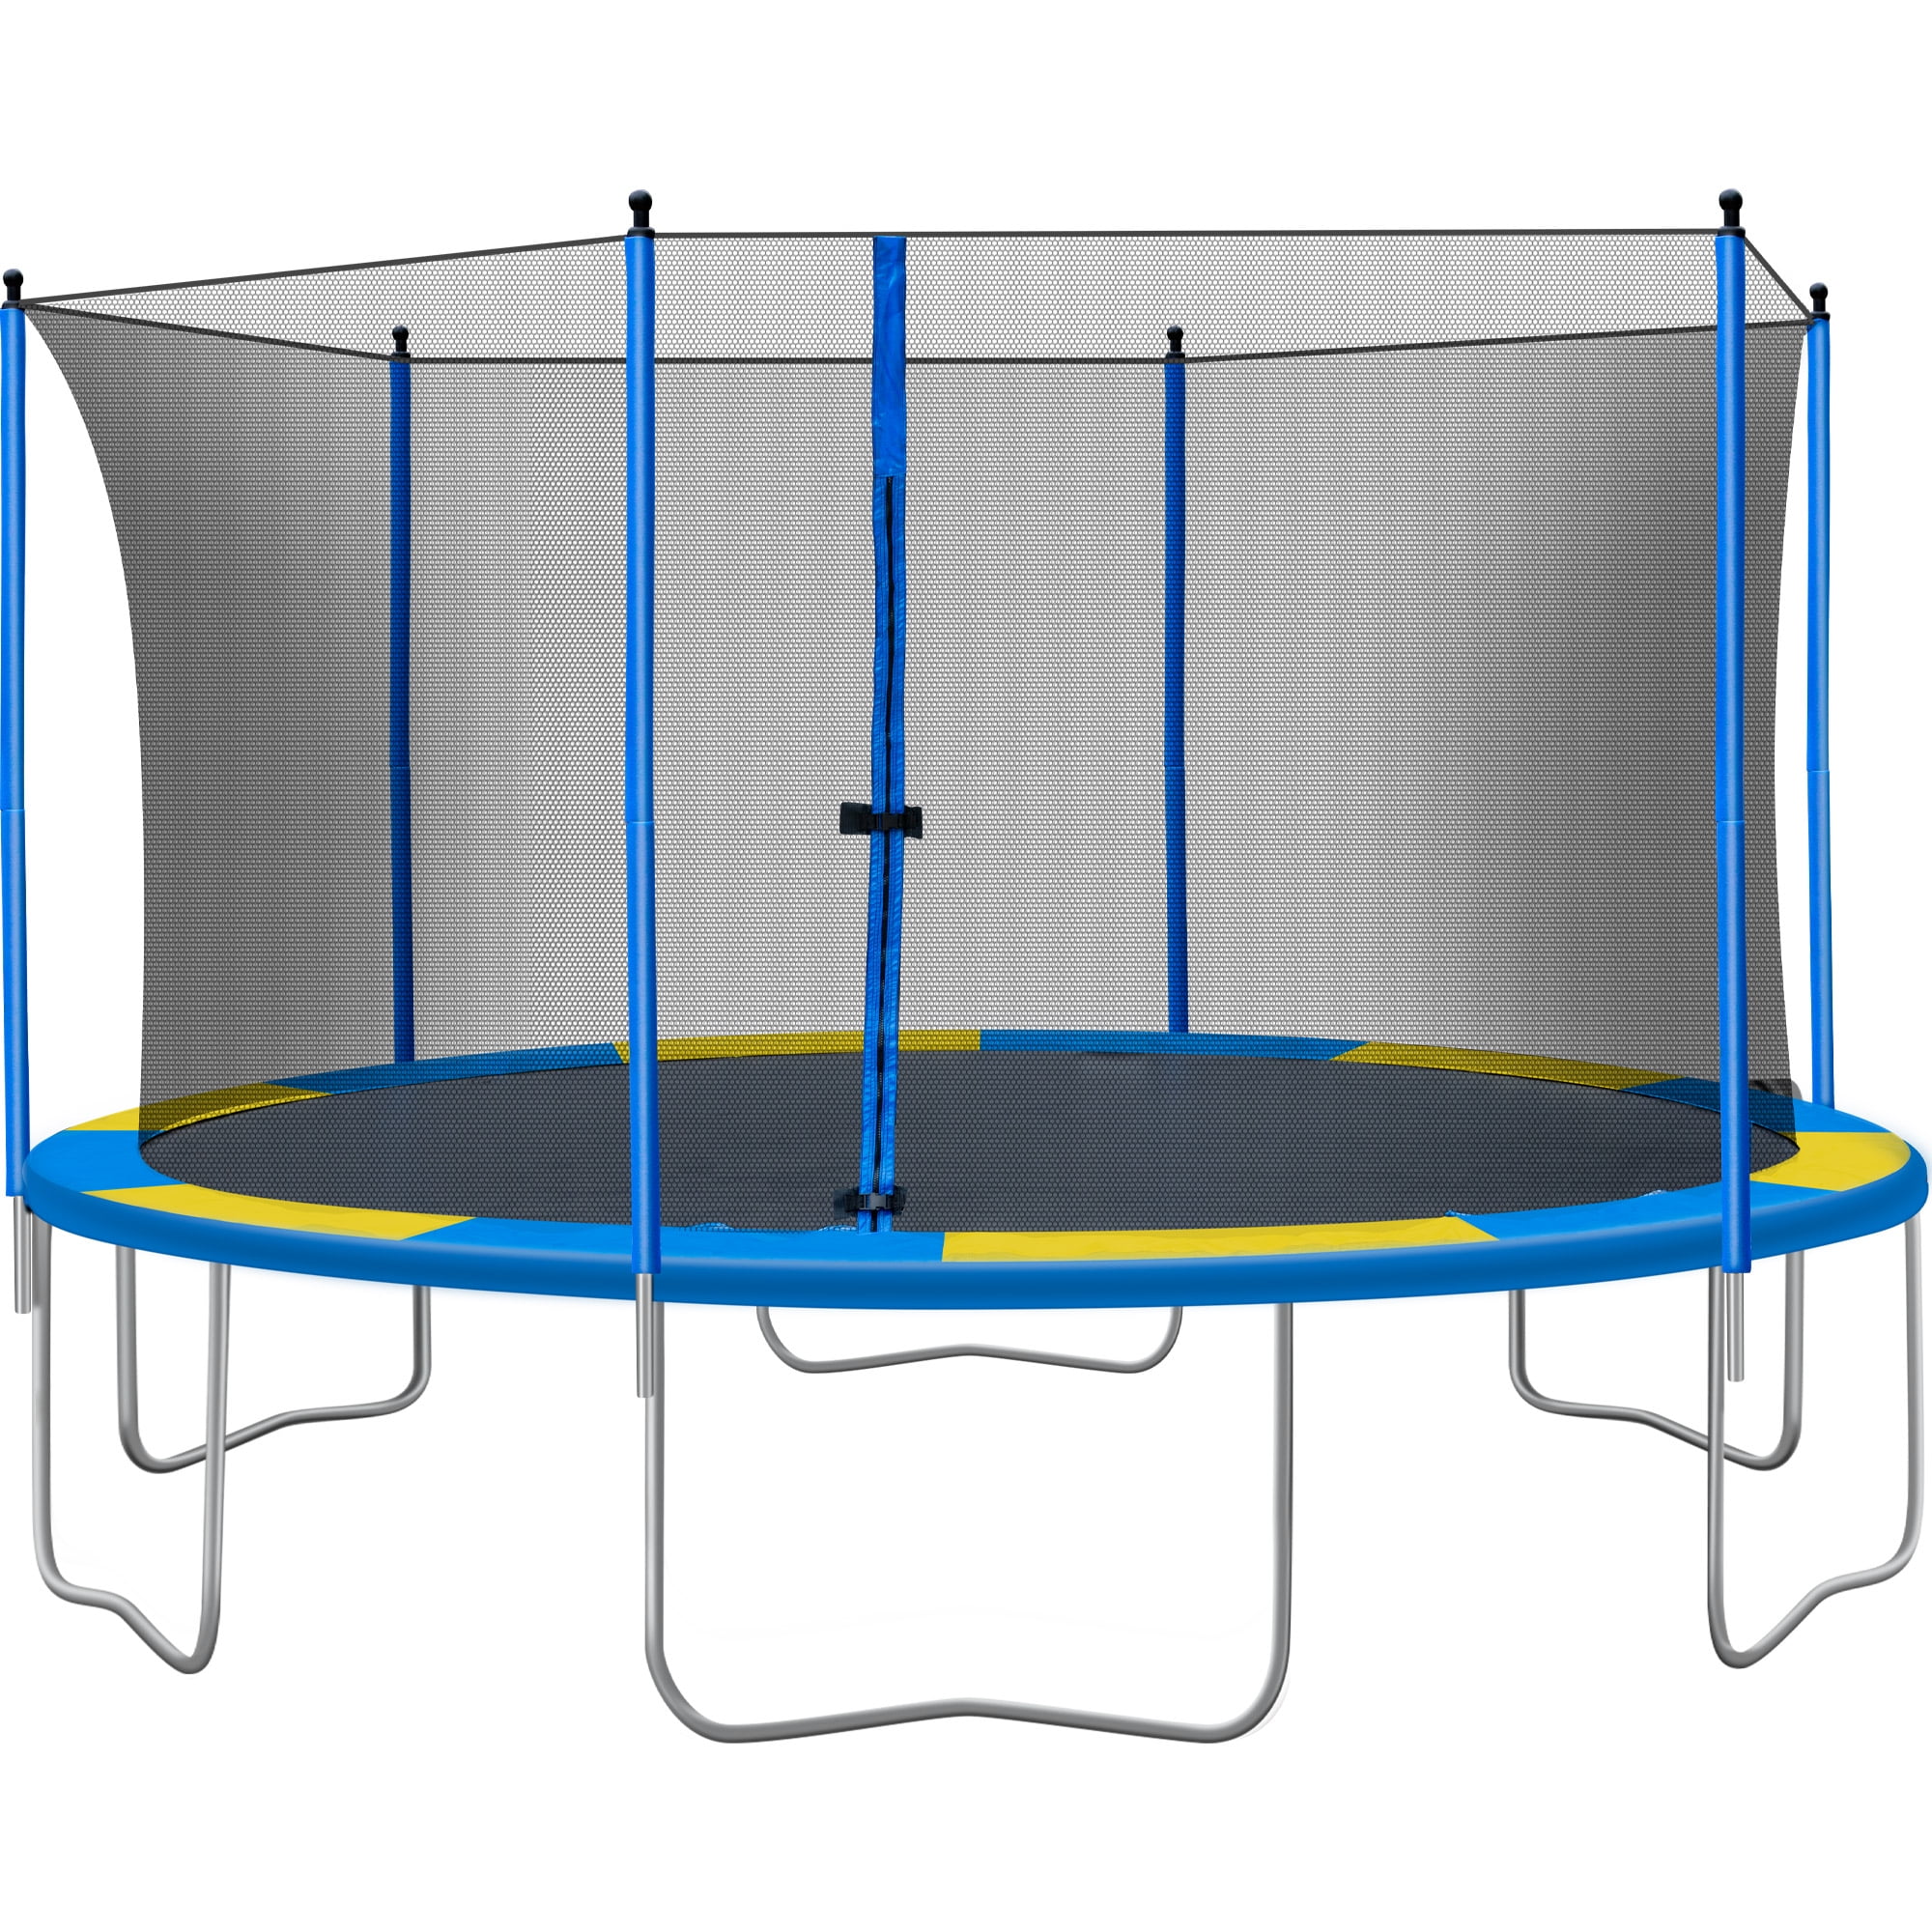 Heberry Trampoline 5 FT for Kids,3-12 Years Child Trampoline with Enclosure Net Jumping Mat and Spring Cover Padding Safety,for Better Bounce Basketball Jump Bounce Training 